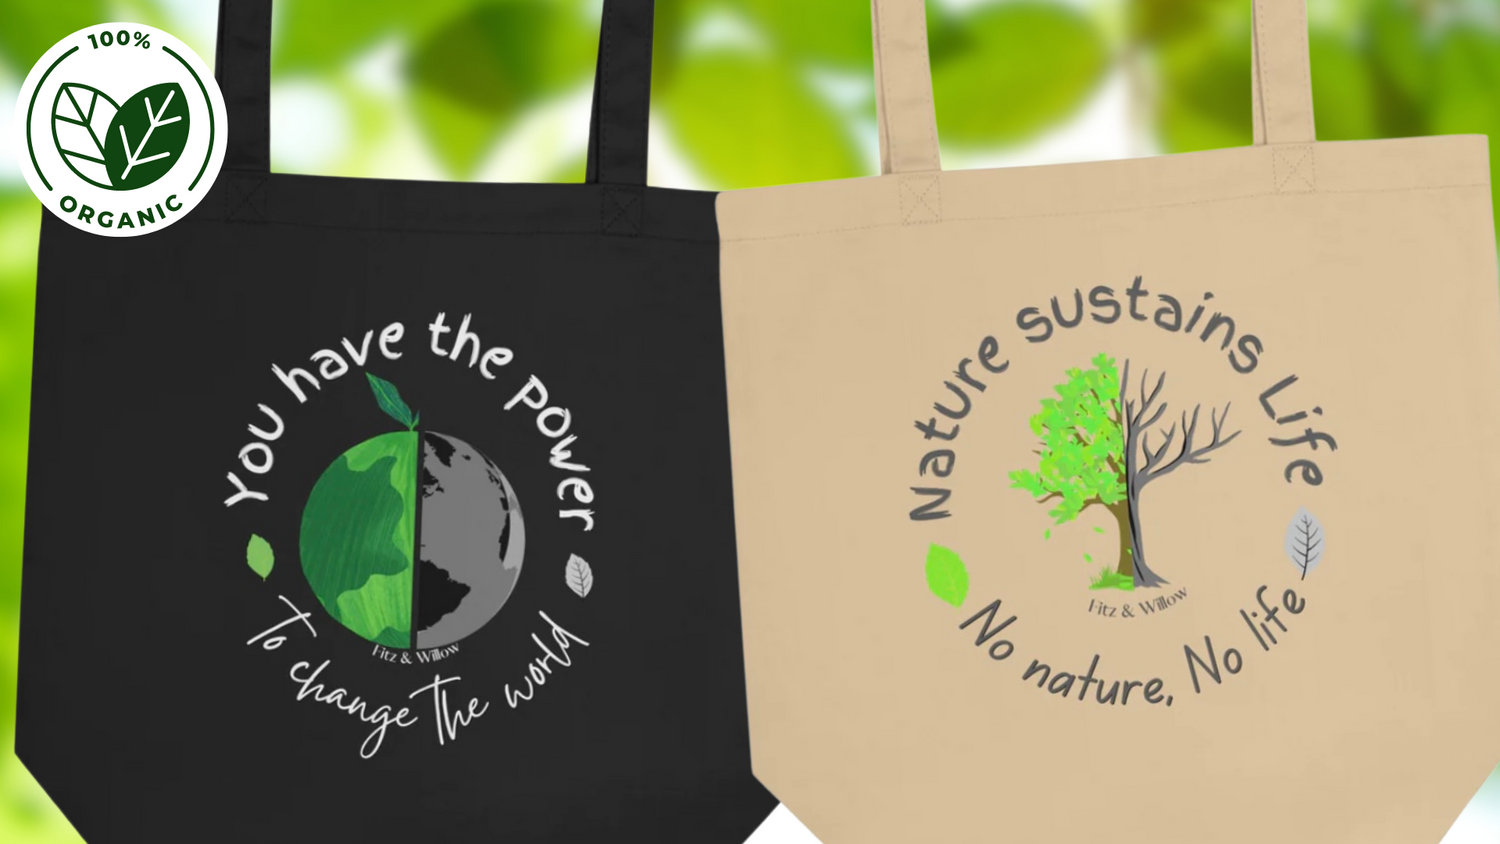 Fitz & Willow, nature and wildlife themed tote bags